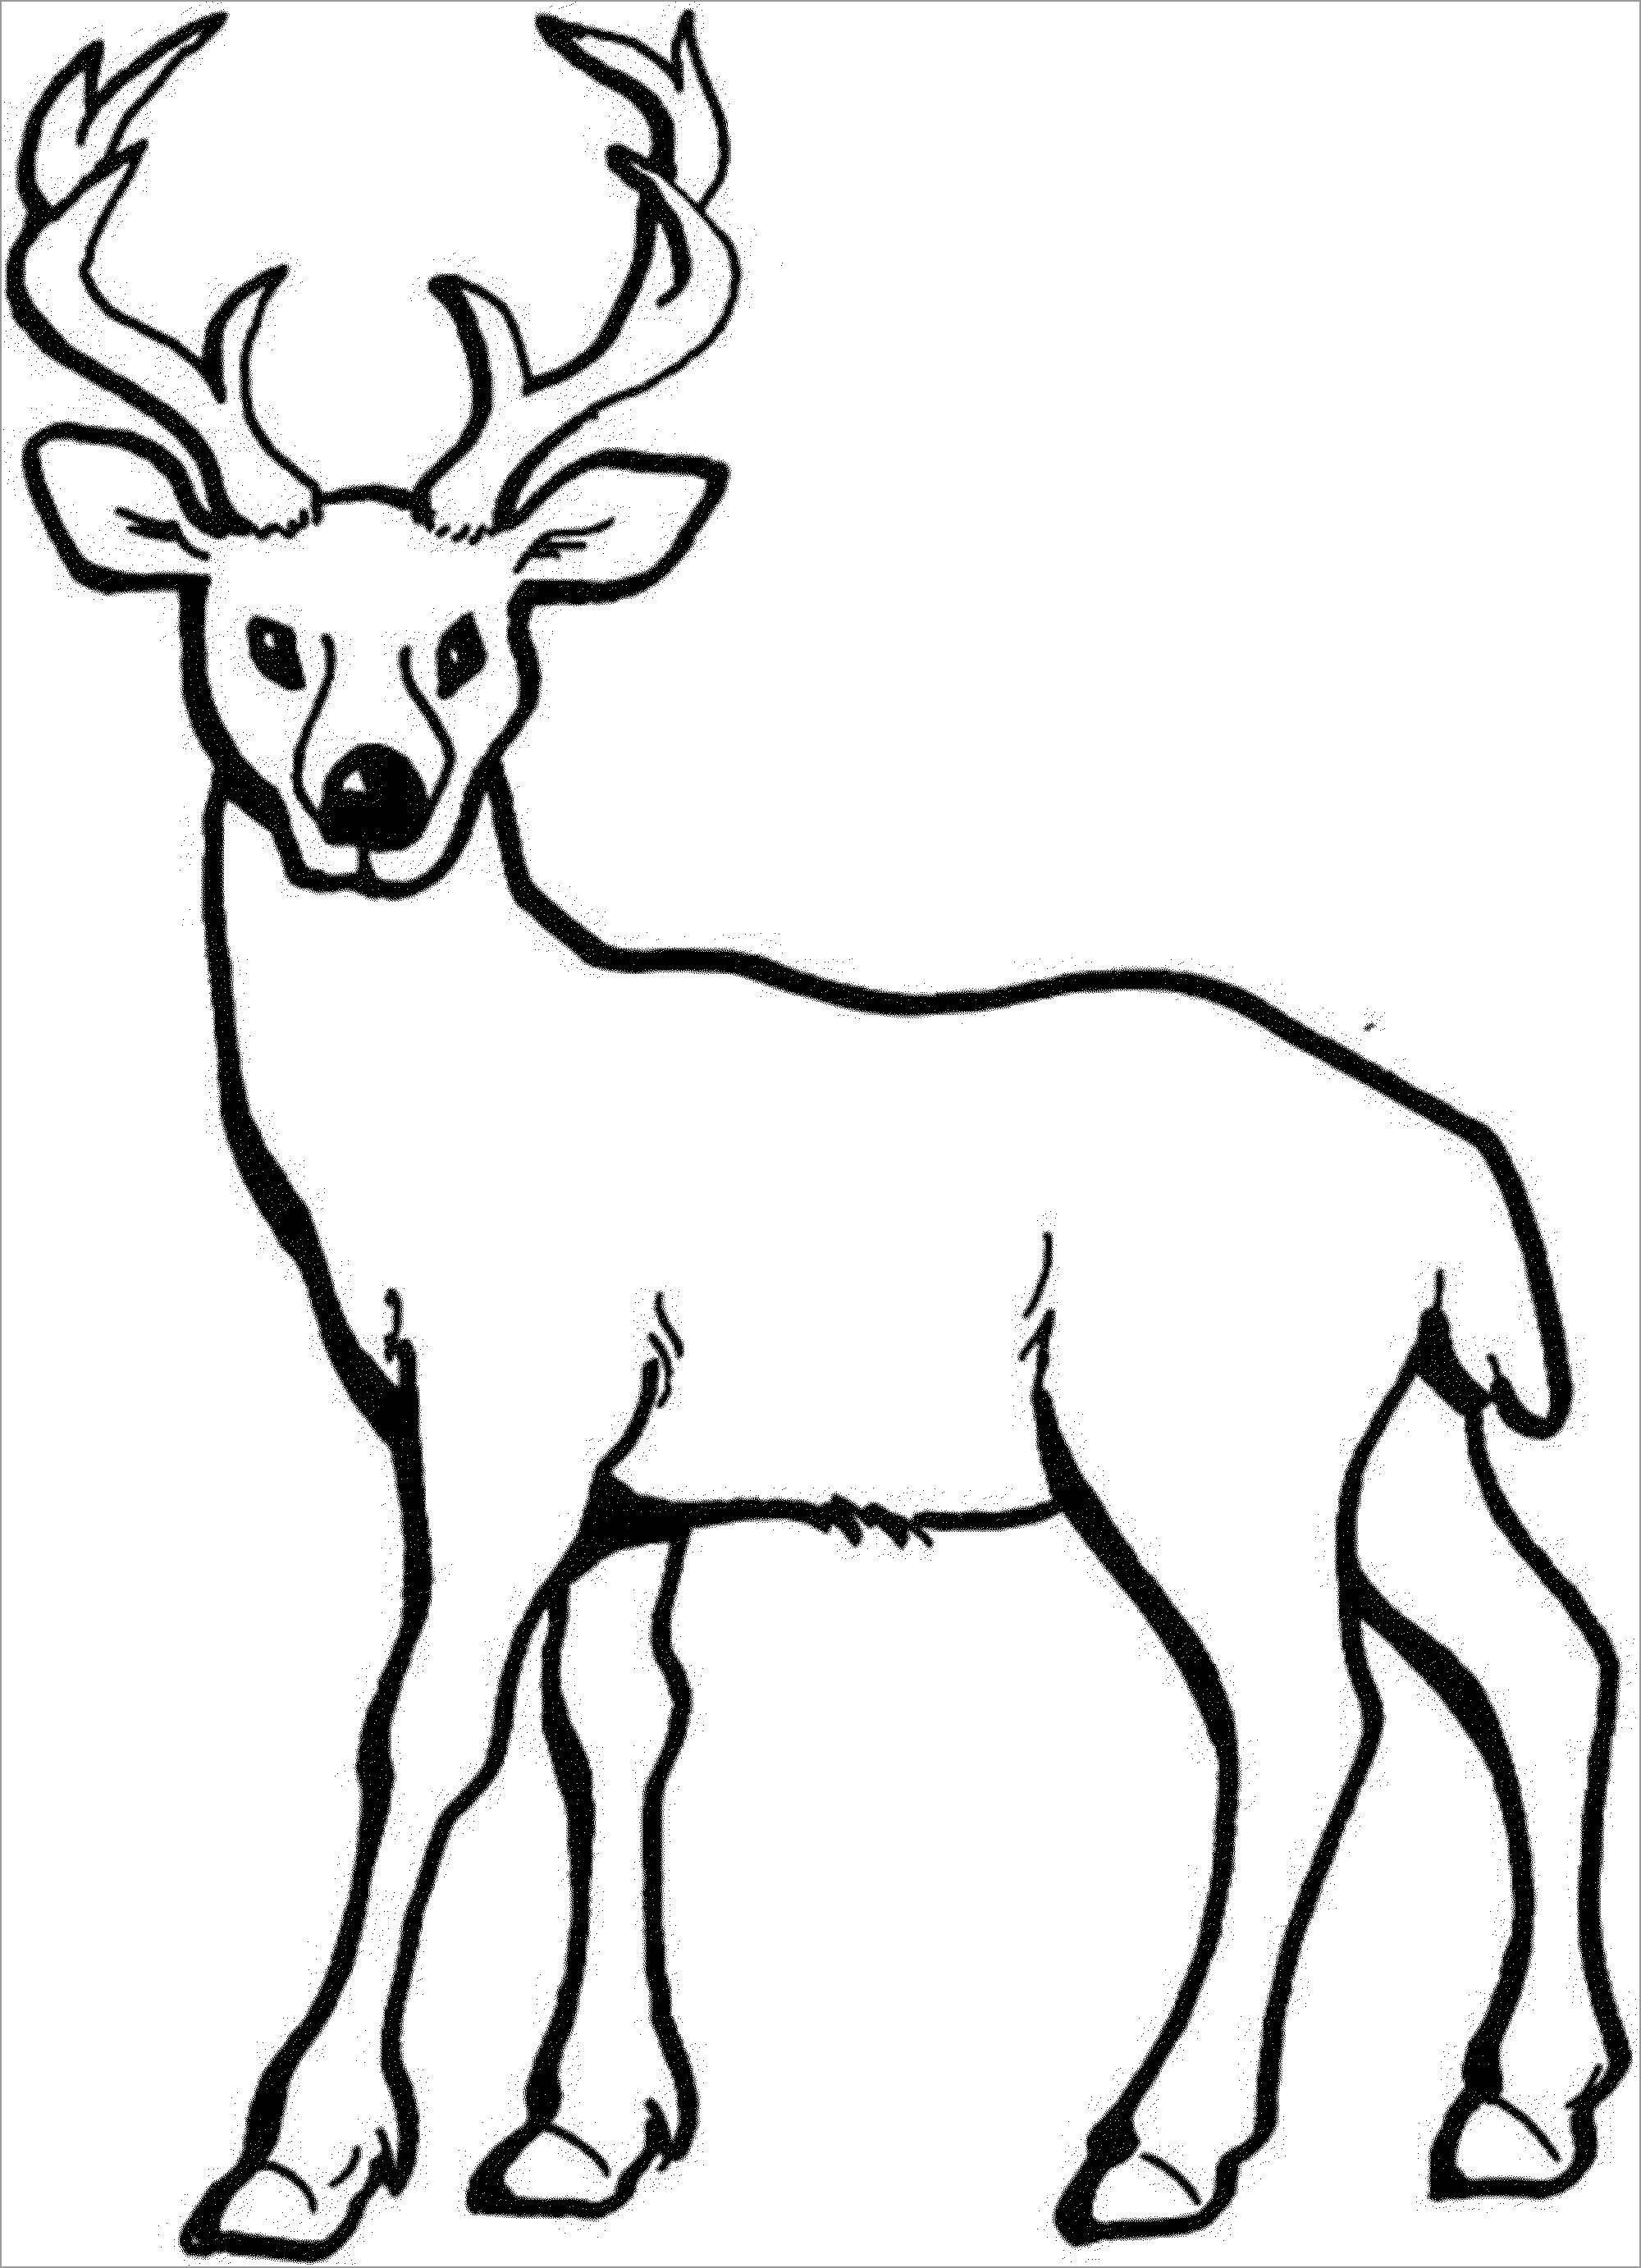 Deer Coloring Page for Kids